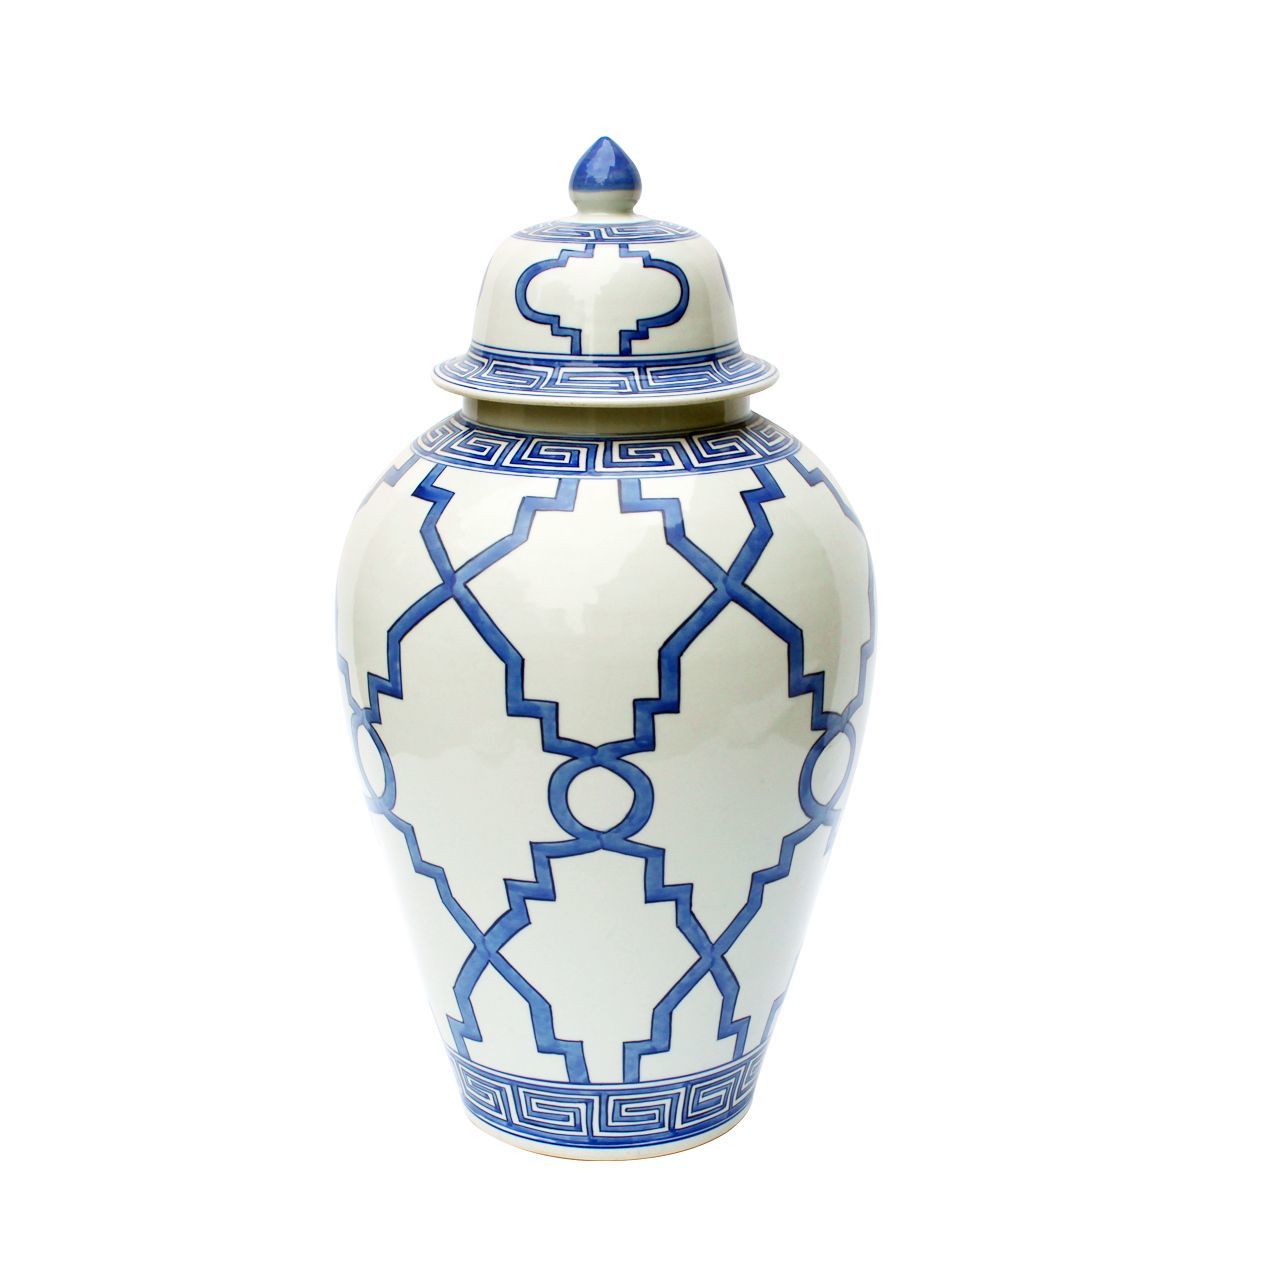 Blue and White Patterned Style Porcelain Temple Jar 23"